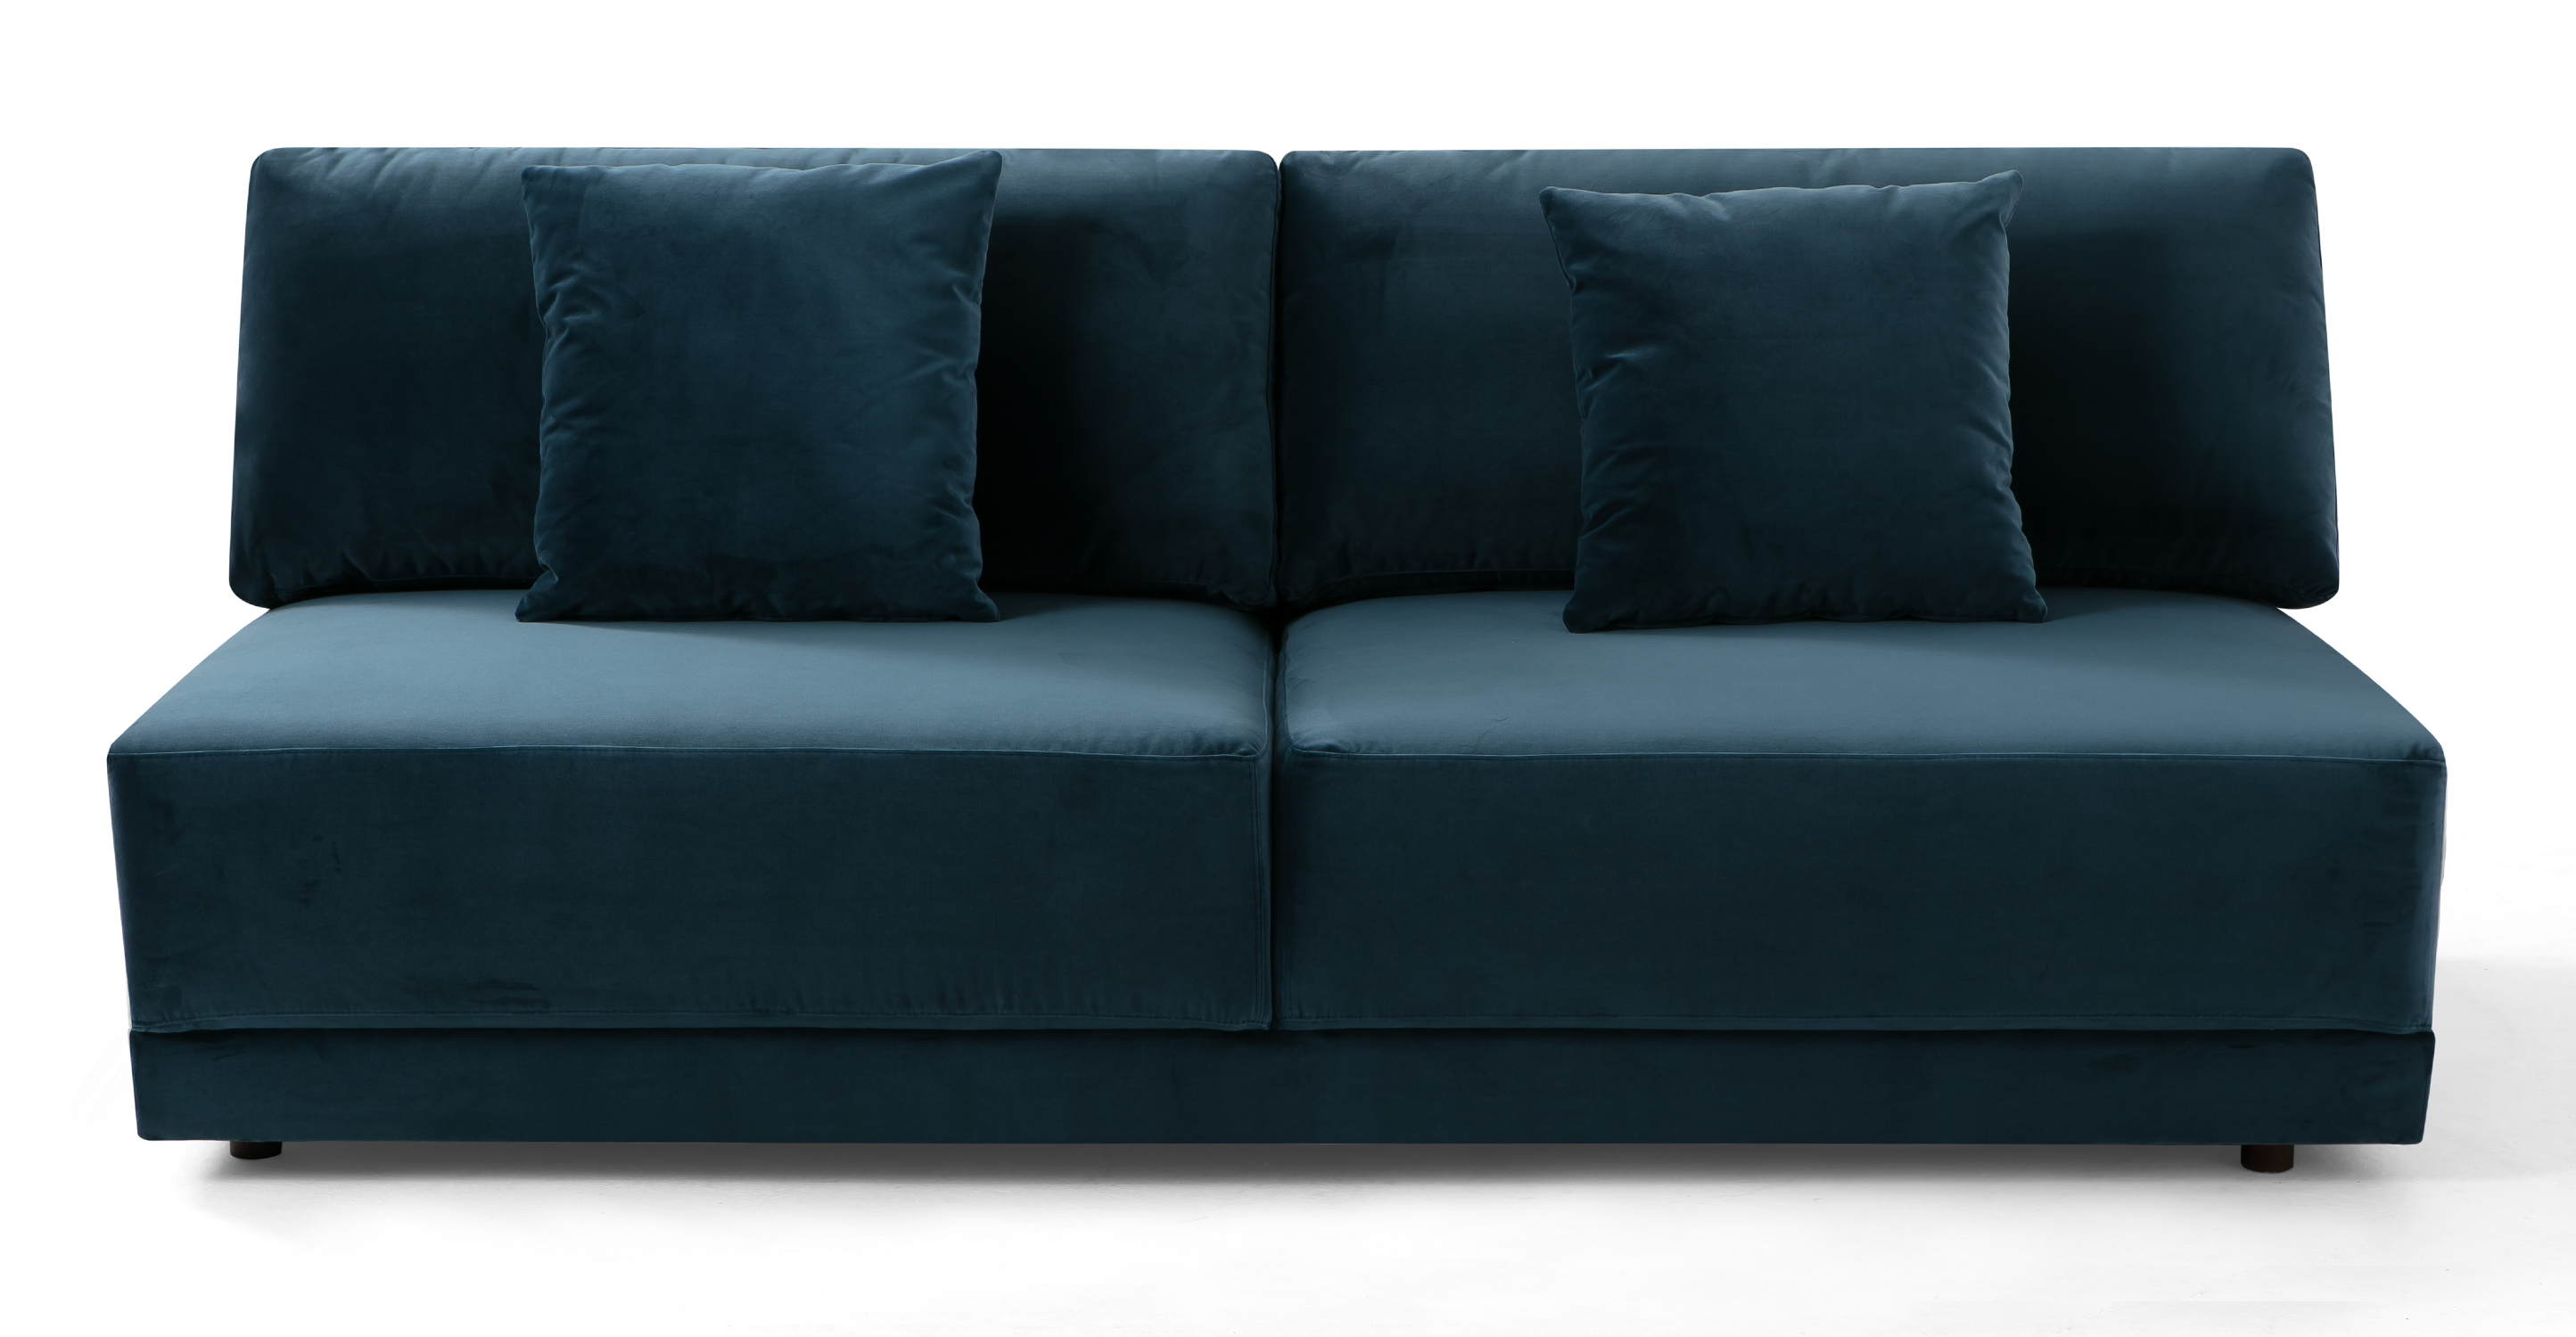 Petrol Domus armless sofa, has two fixed large seat cushions. There are two back cushions and two throw cushions. The sofa is floor based and 100% upholstered. This item can be used alone or added as part of the Domus series. The style is modern and minimalist.